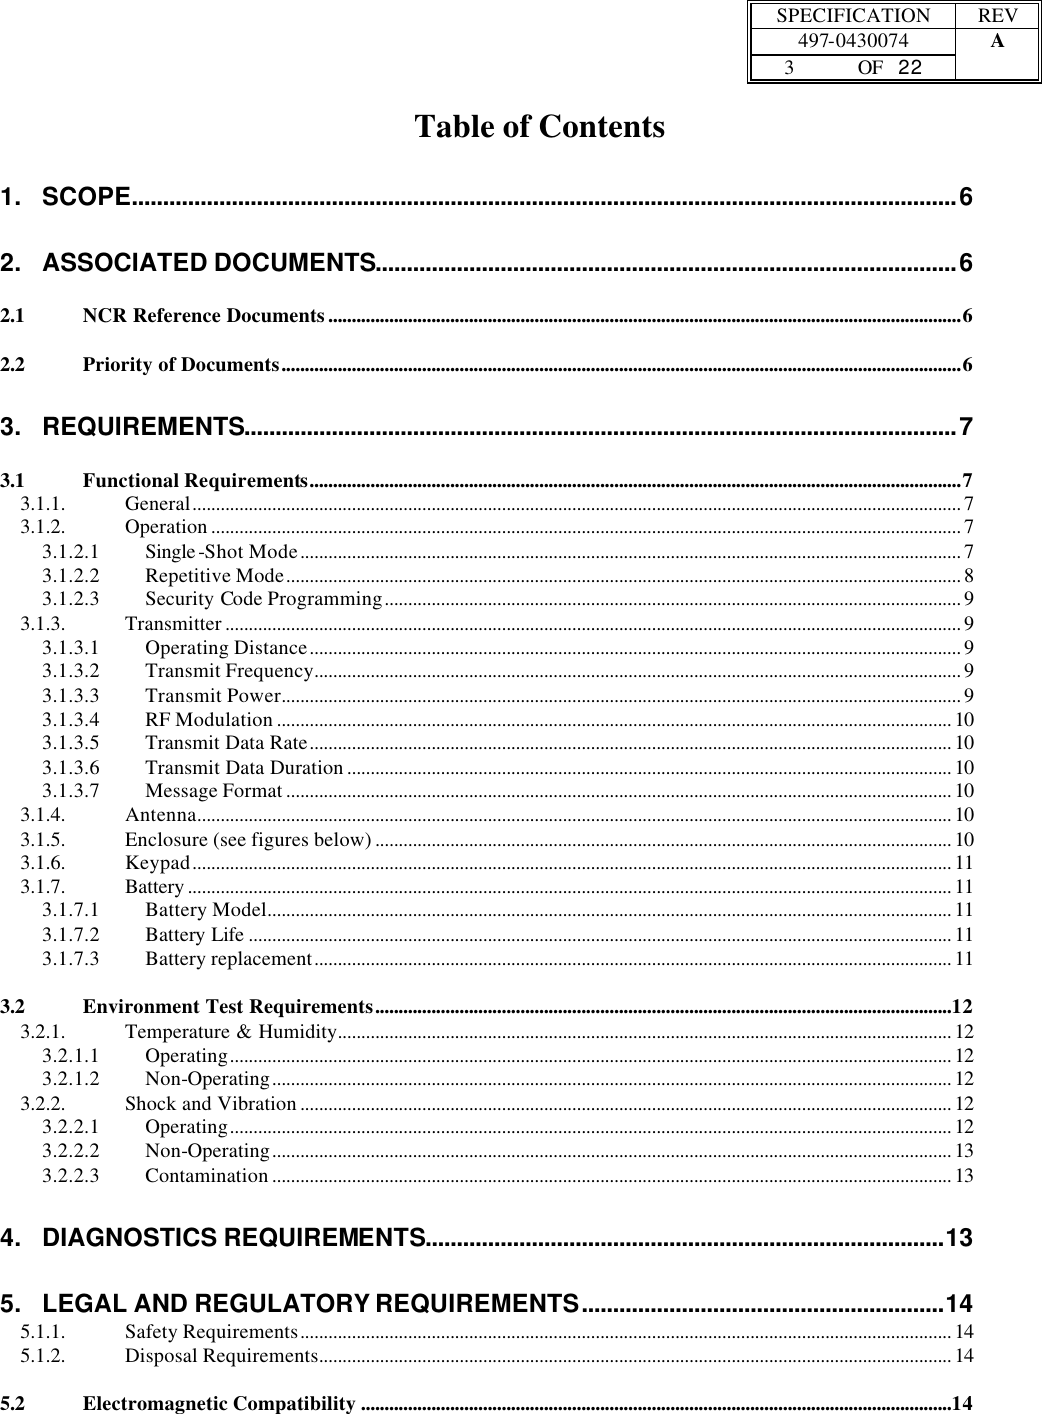  SPECIFICATION REV  497-0430074 A  3 OF   22    Table of Contents 1. SCOPE....................................................................................................................................6 2. ASSOCIATED DOCUMENTS.............................................................................................6 2.1 NCR Reference Documents.......................................................................................................................................6 2.2 Priority of Documents.................................................................................................................................................6 3. REQUIREMENTS..................................................................................................................7 3.1 Functional Requirements...........................................................................................................................................7 3.1.1. General.................................................................................................................................................................... 7 3.1.2. Operation ................................................................................................................................................................ 7 3.1.2.1 Single -Shot Mode............................................................................................................................................. 7 3.1.2.2 Repetitive Mode................................................................................................................................................ 8 3.1.2.3 Security Code Programming........................................................................................................................... 9 3.1.3. Transmitter ............................................................................................................................................................. 9 3.1.3.1 Operating Distance........................................................................................................................................... 9 3.1.3.2 Transmit Frequency.......................................................................................................................................... 9 3.1.3.3 Transmit Power................................................................................................................................................. 9 3.1.3.4 RF Modulation ................................................................................................................................................ 10 3.1.3.5 Transmit Data Rate......................................................................................................................................... 10 3.1.3.6 Transmit Data Duration ................................................................................................................................. 10 3.1.3.7 Message Format .............................................................................................................................................. 10 3.1.4. Antenna................................................................................................................................................................. 10 3.1.5. Enclosure (see figures below) ........................................................................................................................... 10 3.1.6. Keypad.................................................................................................................................................................. 11 3.1.7. Battery ................................................................................................................................................................... 11 3.1.7.1 Battery Model.................................................................................................................................................. 11 3.1.7.2 Battery Life ...................................................................................................................................................... 11 3.1.7.3 Battery replacement........................................................................................................................................ 11 3.2 Environment Test Requirements...........................................................................................................................12 3.2.1. Temperature &amp; Humidity................................................................................................................................... 12 3.2.1.1 Operating.......................................................................................................................................................... 12 3.2.1.2 Non-Operating................................................................................................................................................. 12 3.2.2. Shock and Vibration ........................................................................................................................................... 12 3.2.2.1 Operating.......................................................................................................................................................... 12 3.2.2.2 Non-Operating................................................................................................................................................. 13 3.2.2.3 Contamination ................................................................................................................................................. 13 4. DIAGNOSTICS REQUIREMENTS...................................................................................13 5. LEGAL AND REGULATORY REQUIREMENTS..........................................................14 5.1.1. Safety Requirements........................................................................................................................................... 14 5.1.2. Disposal Requirements....................................................................................................................................... 14 5.2 Electromagnetic Compatibility ..............................................................................................................................14 